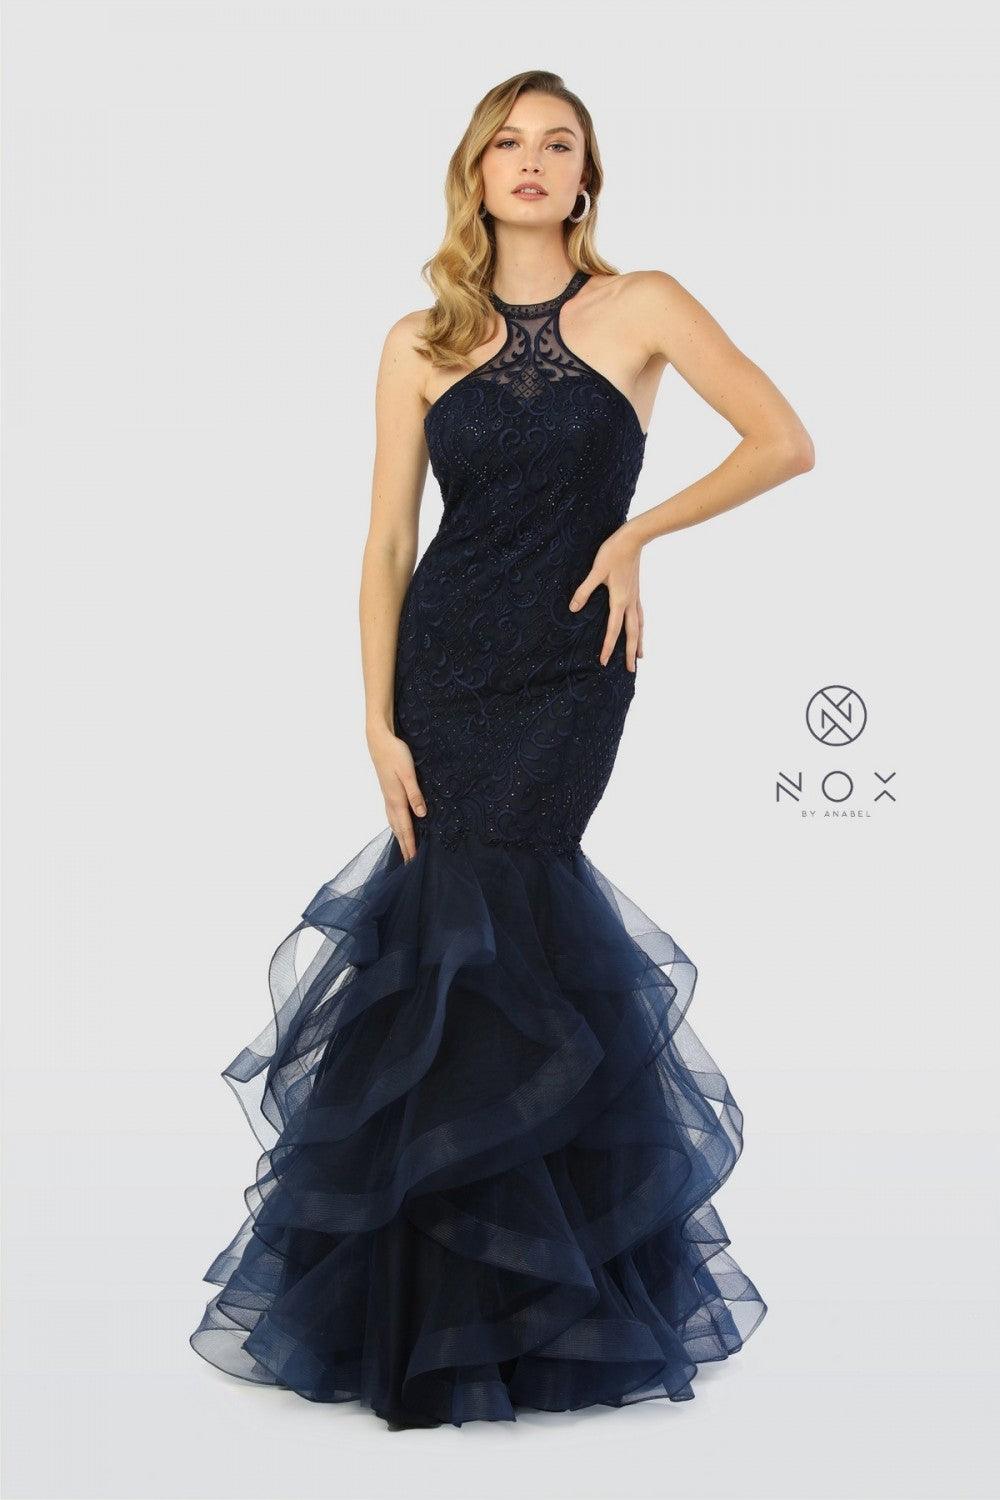 Long Ruffled Prom Dress Mermaid Evening Gown - The Dress Outlet Nox Anabel